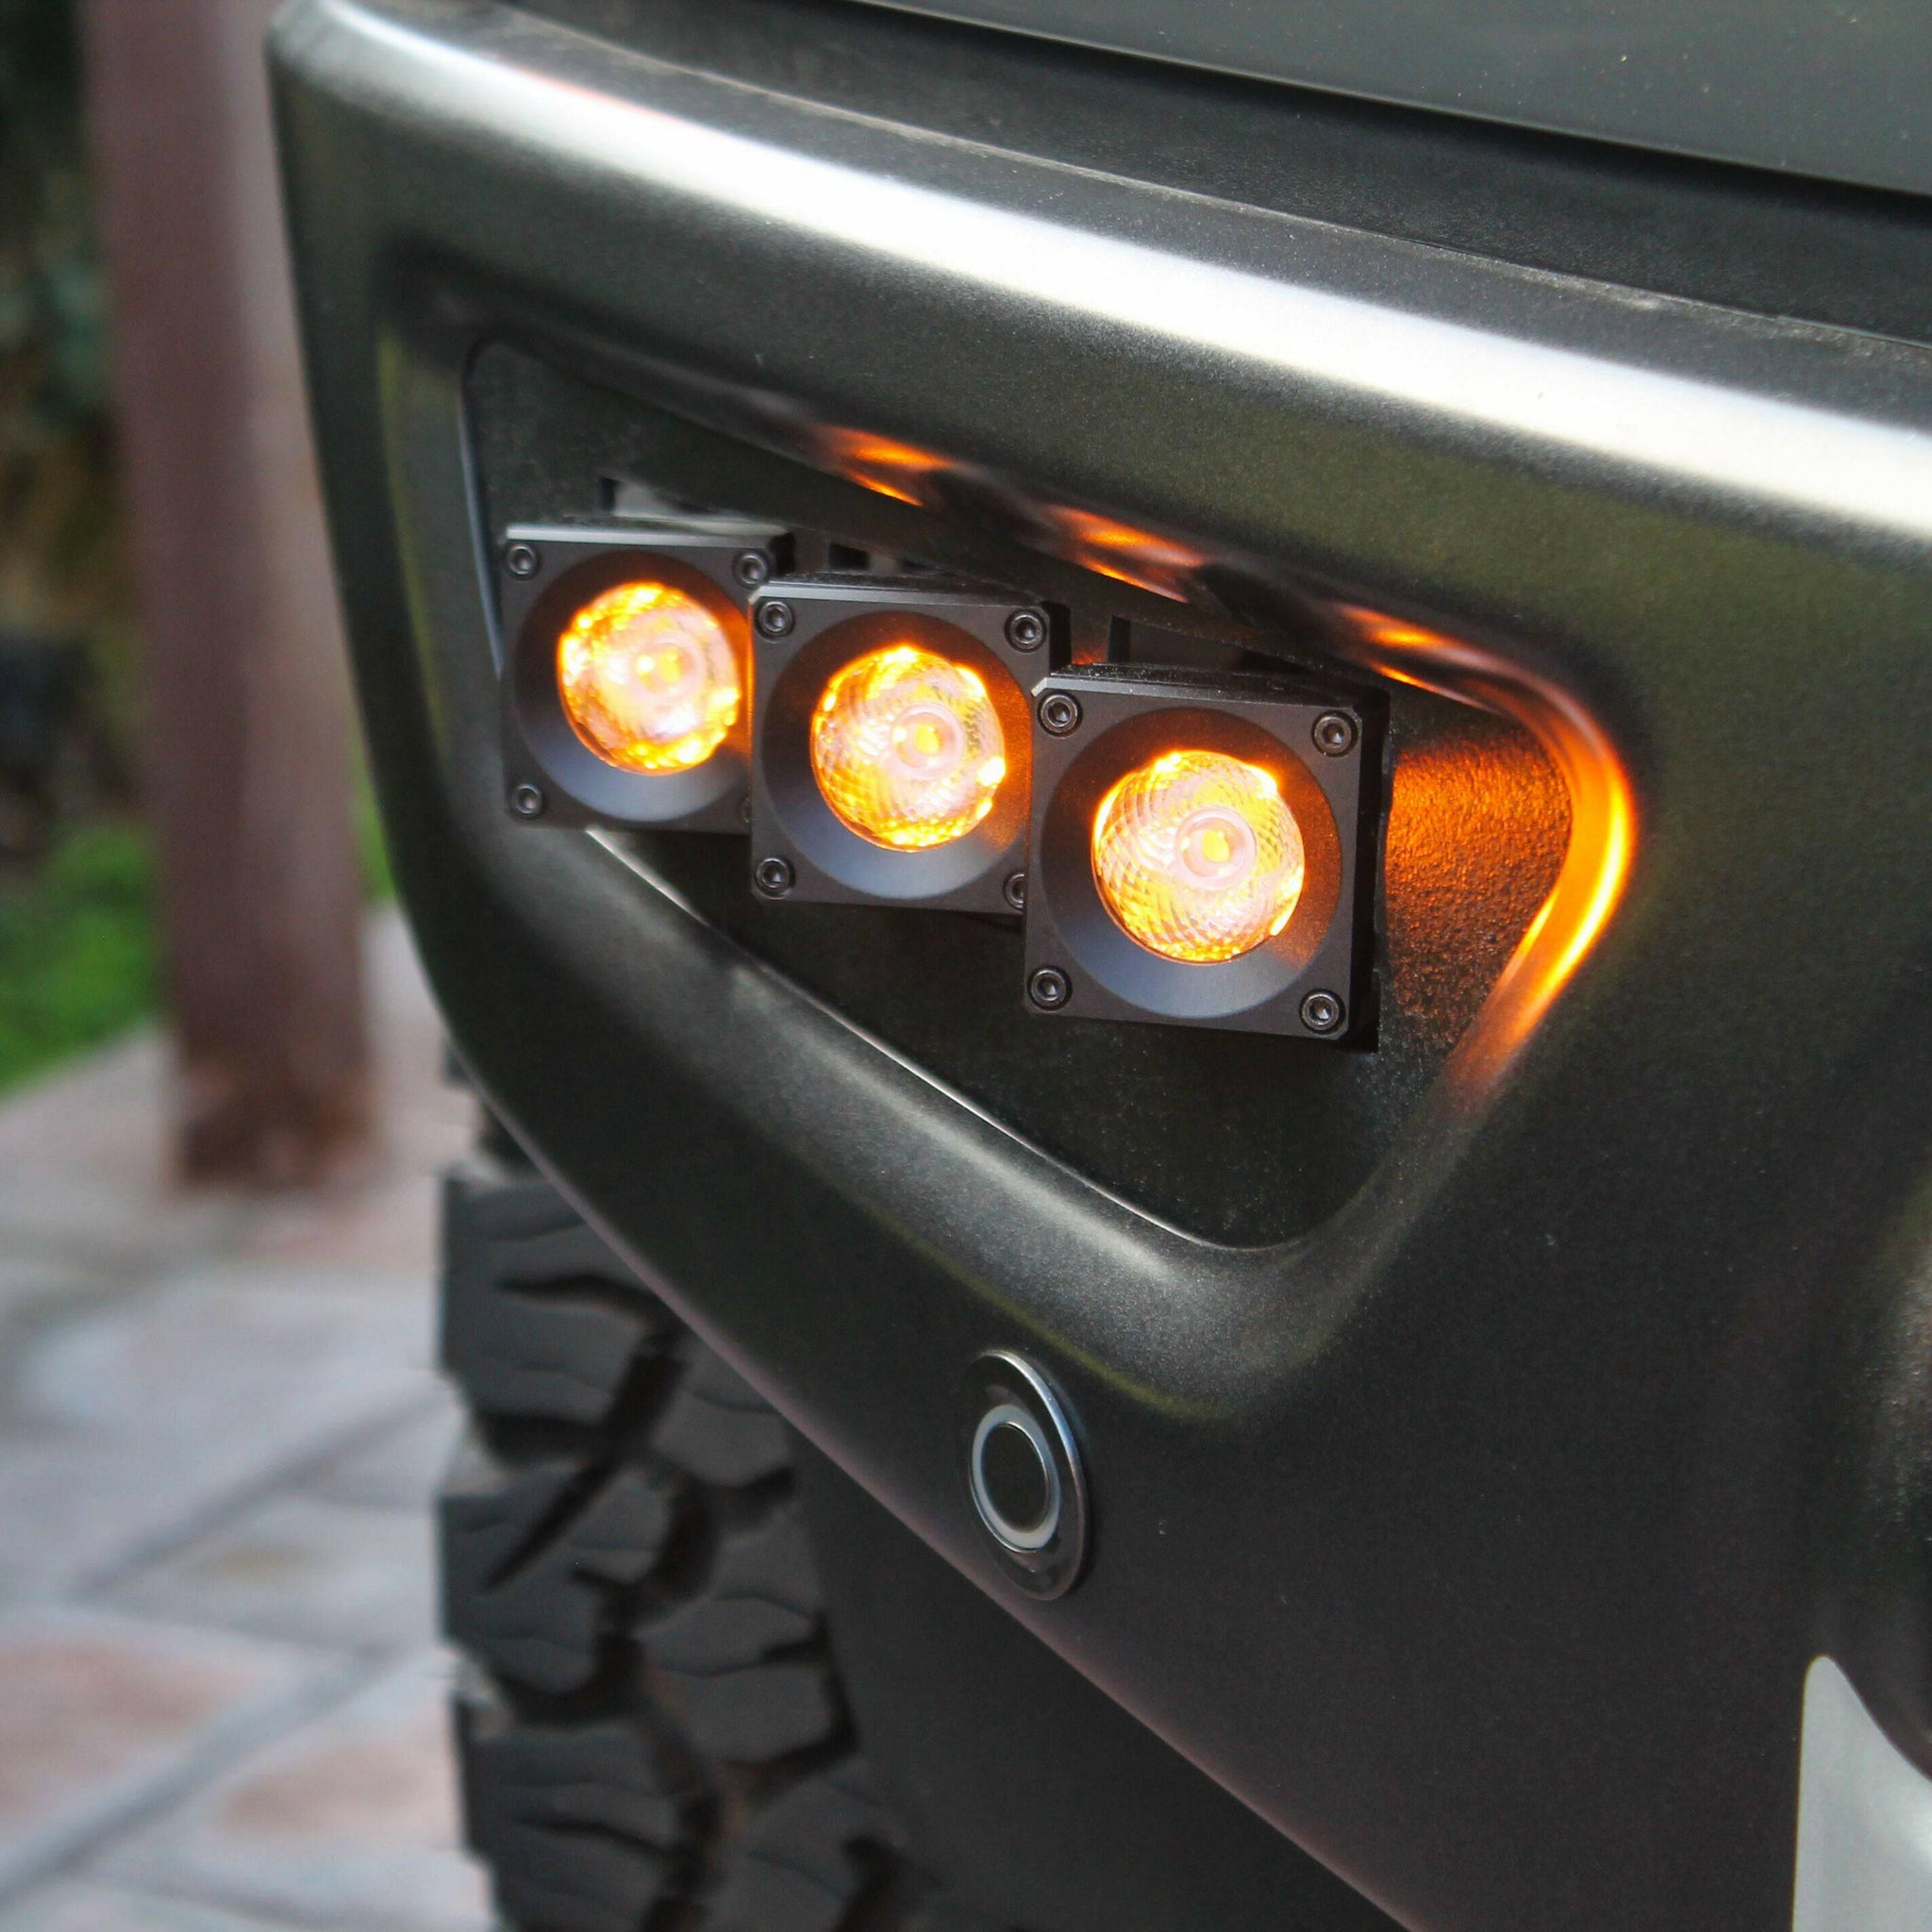 up close view gray 2021 2022 2023 ford raptor generation 3 with 3 amber 20watt squares